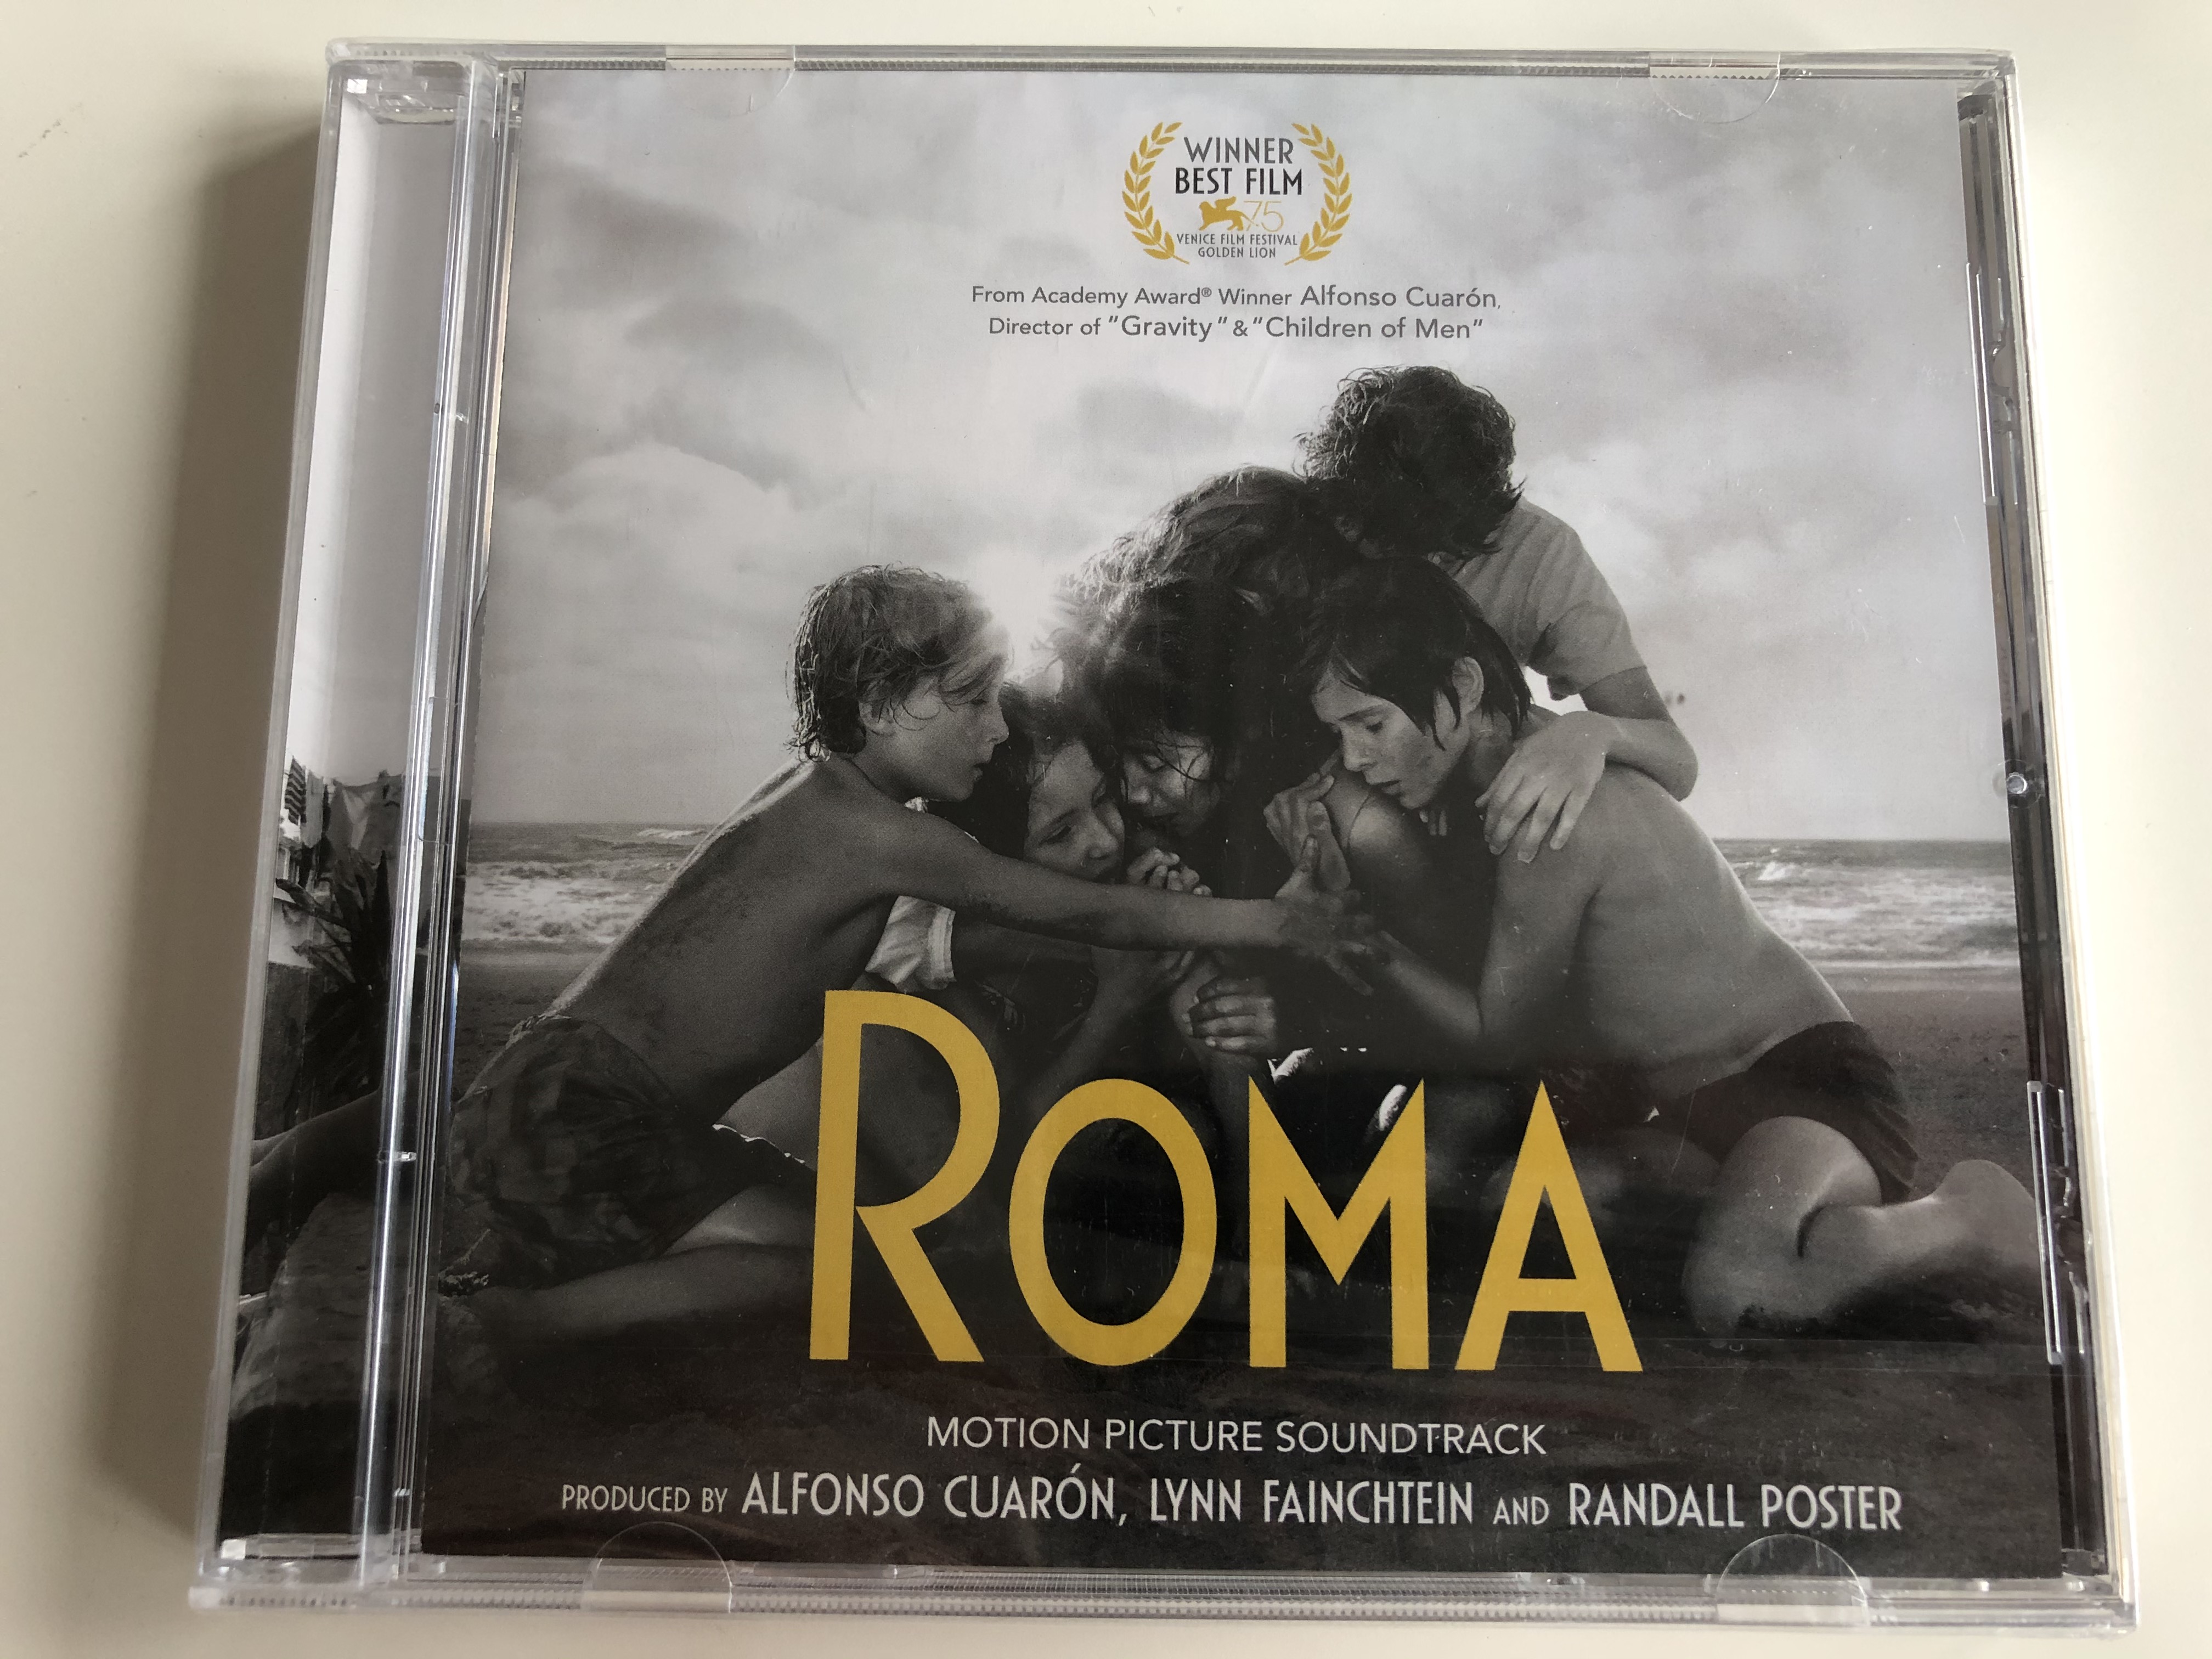 roma-motion-picture-soundtrack-produced-by-alfonso-cuaron-lynn-fainchtein-and-randall-poster-sony-music-audio-cd-2018-19075925932-1-.jpg